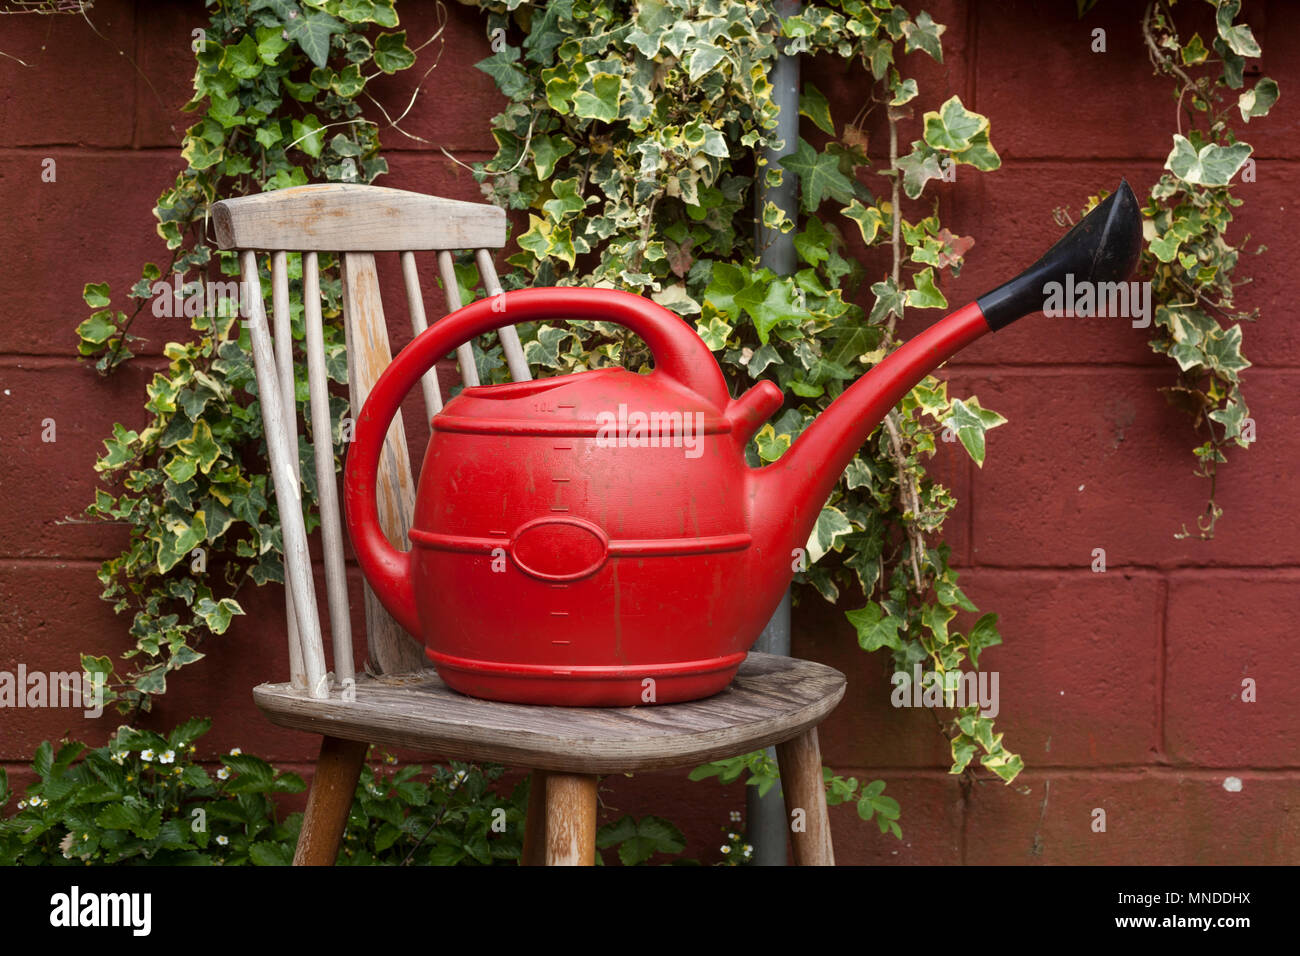 Red plastic Watering Can on wooden stool in a garden in front of Ivy Stock Photo